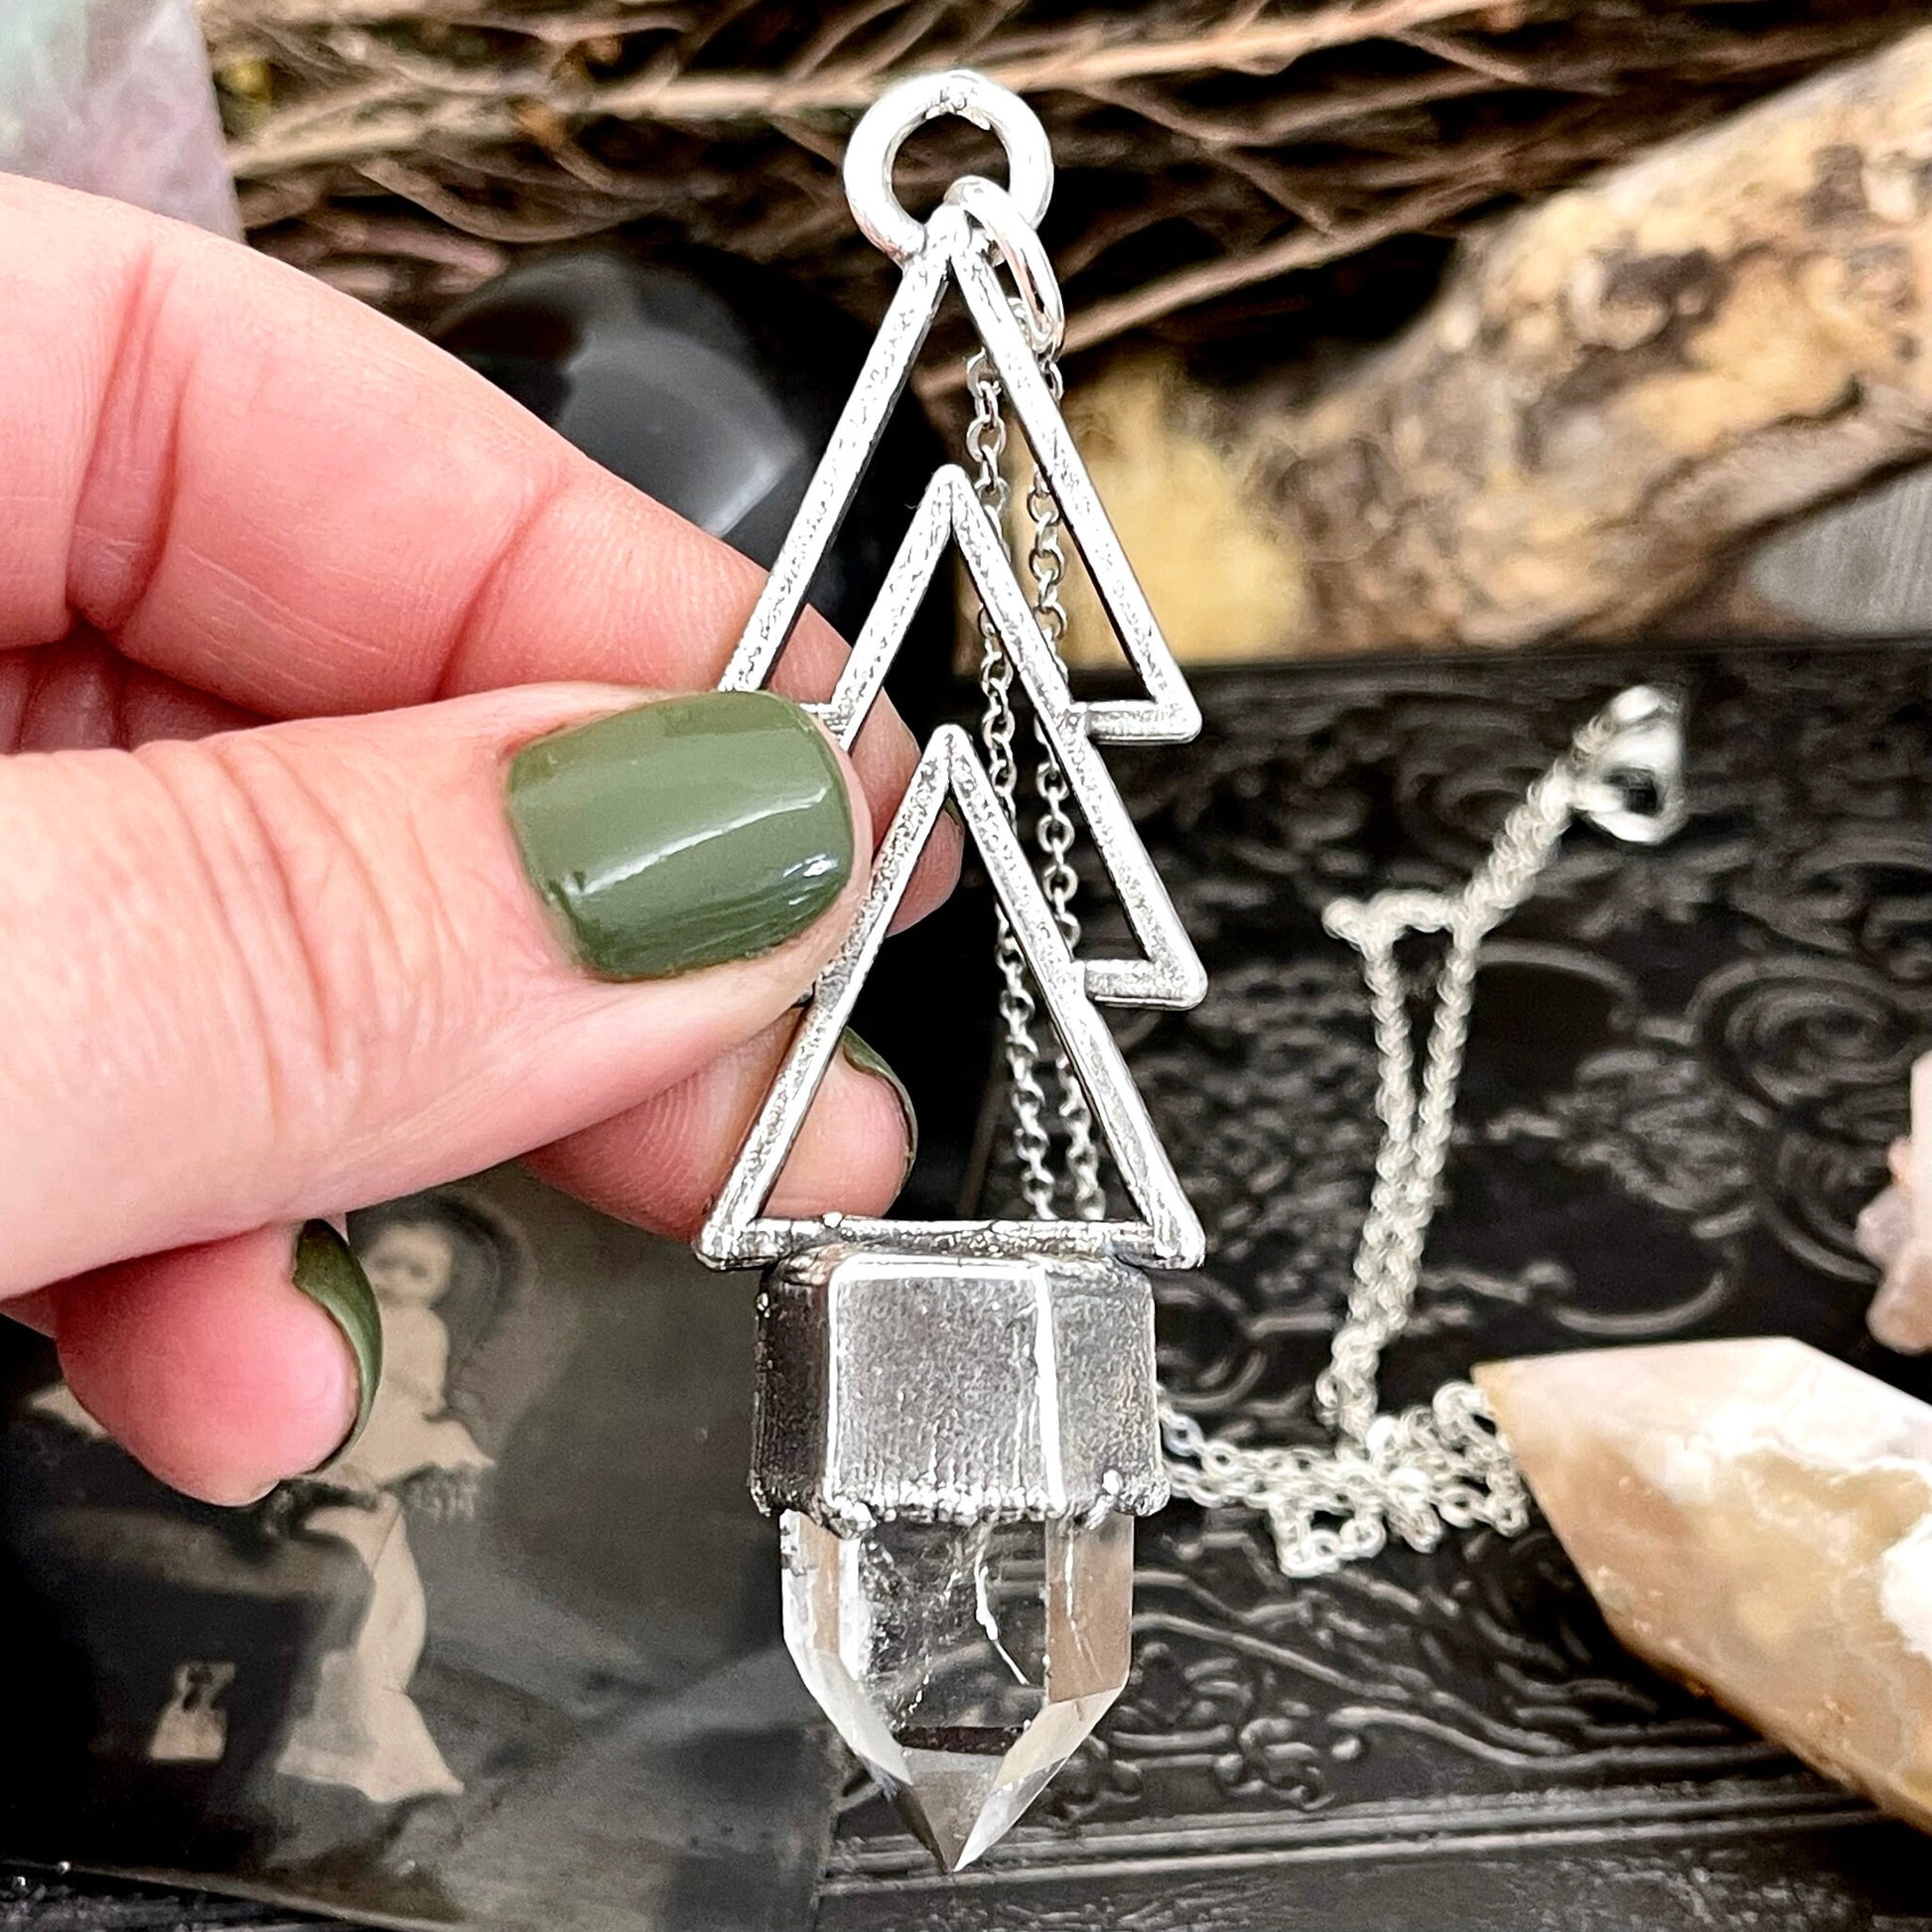 Crystal Necklace - Moss & Moon Collection - Clear Quartz Necklace set in Fine Silver / One of a Kind - by Foxlark / Witchy Goth Jewelry